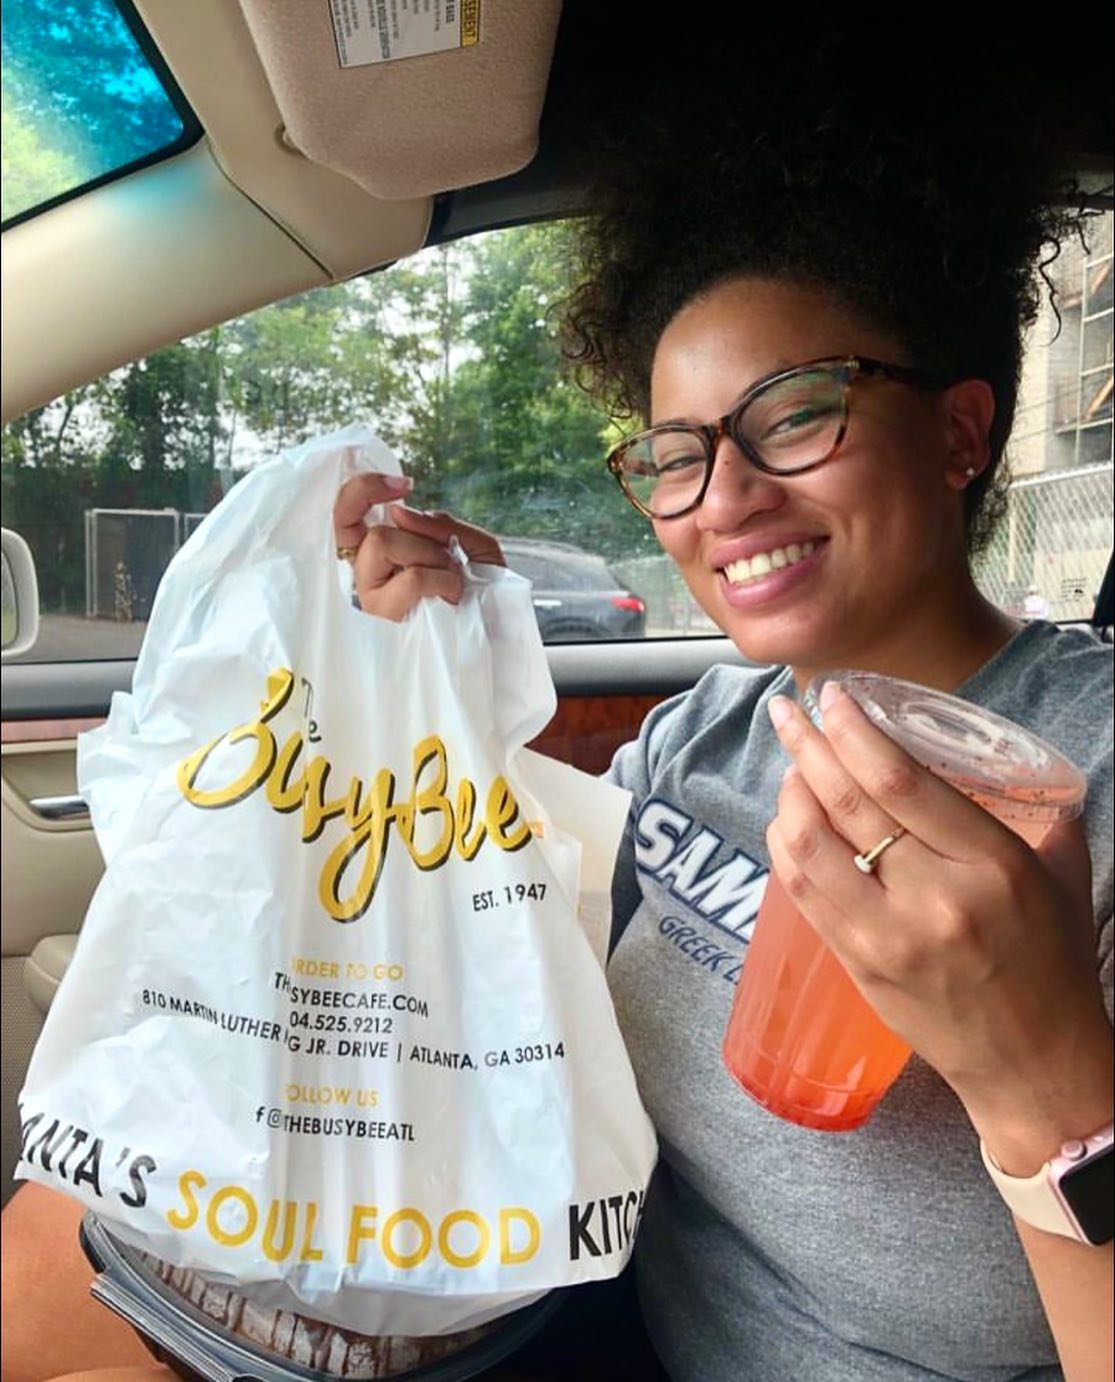 It&rsquo;s #BusyBee All Weekend Long! 🐝 Order Now Online At TheBusyBeeCafe.com 
.
.
.
.
.
.
#ATL #Atlanta #SoulFood #AtlantaRestaurant #AtlantaEats #Foodie #ATLEats #AtlantaFood #AtlantaLife #AtlantaFoodie #FriedChicken #ATLFoodie #ATLFood #TheBusyB